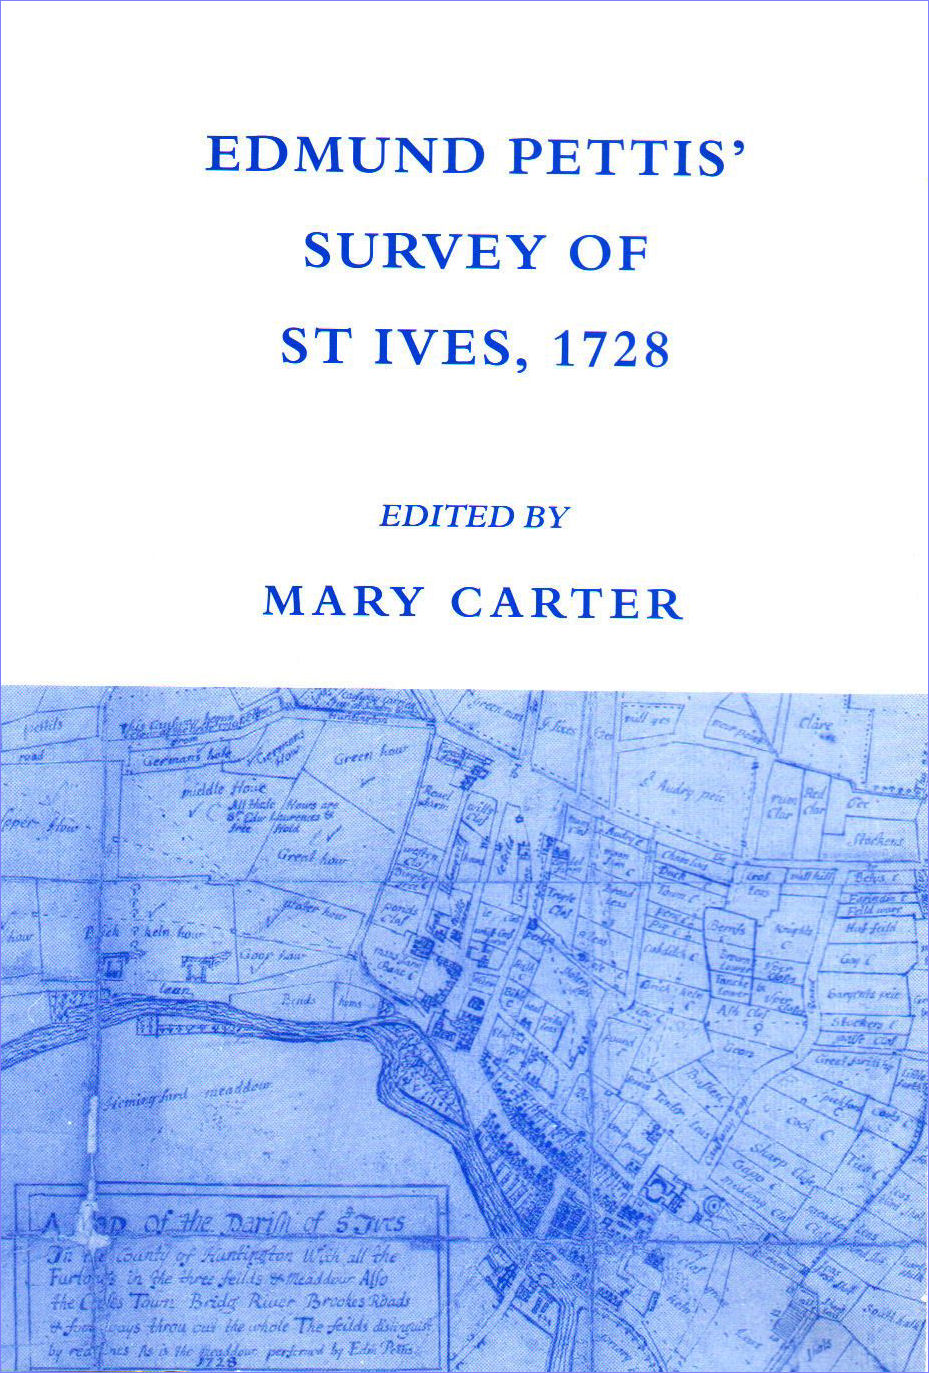 16. Edmund Pettis’s Survey of St Ives 1728. Edited by Mary Carter